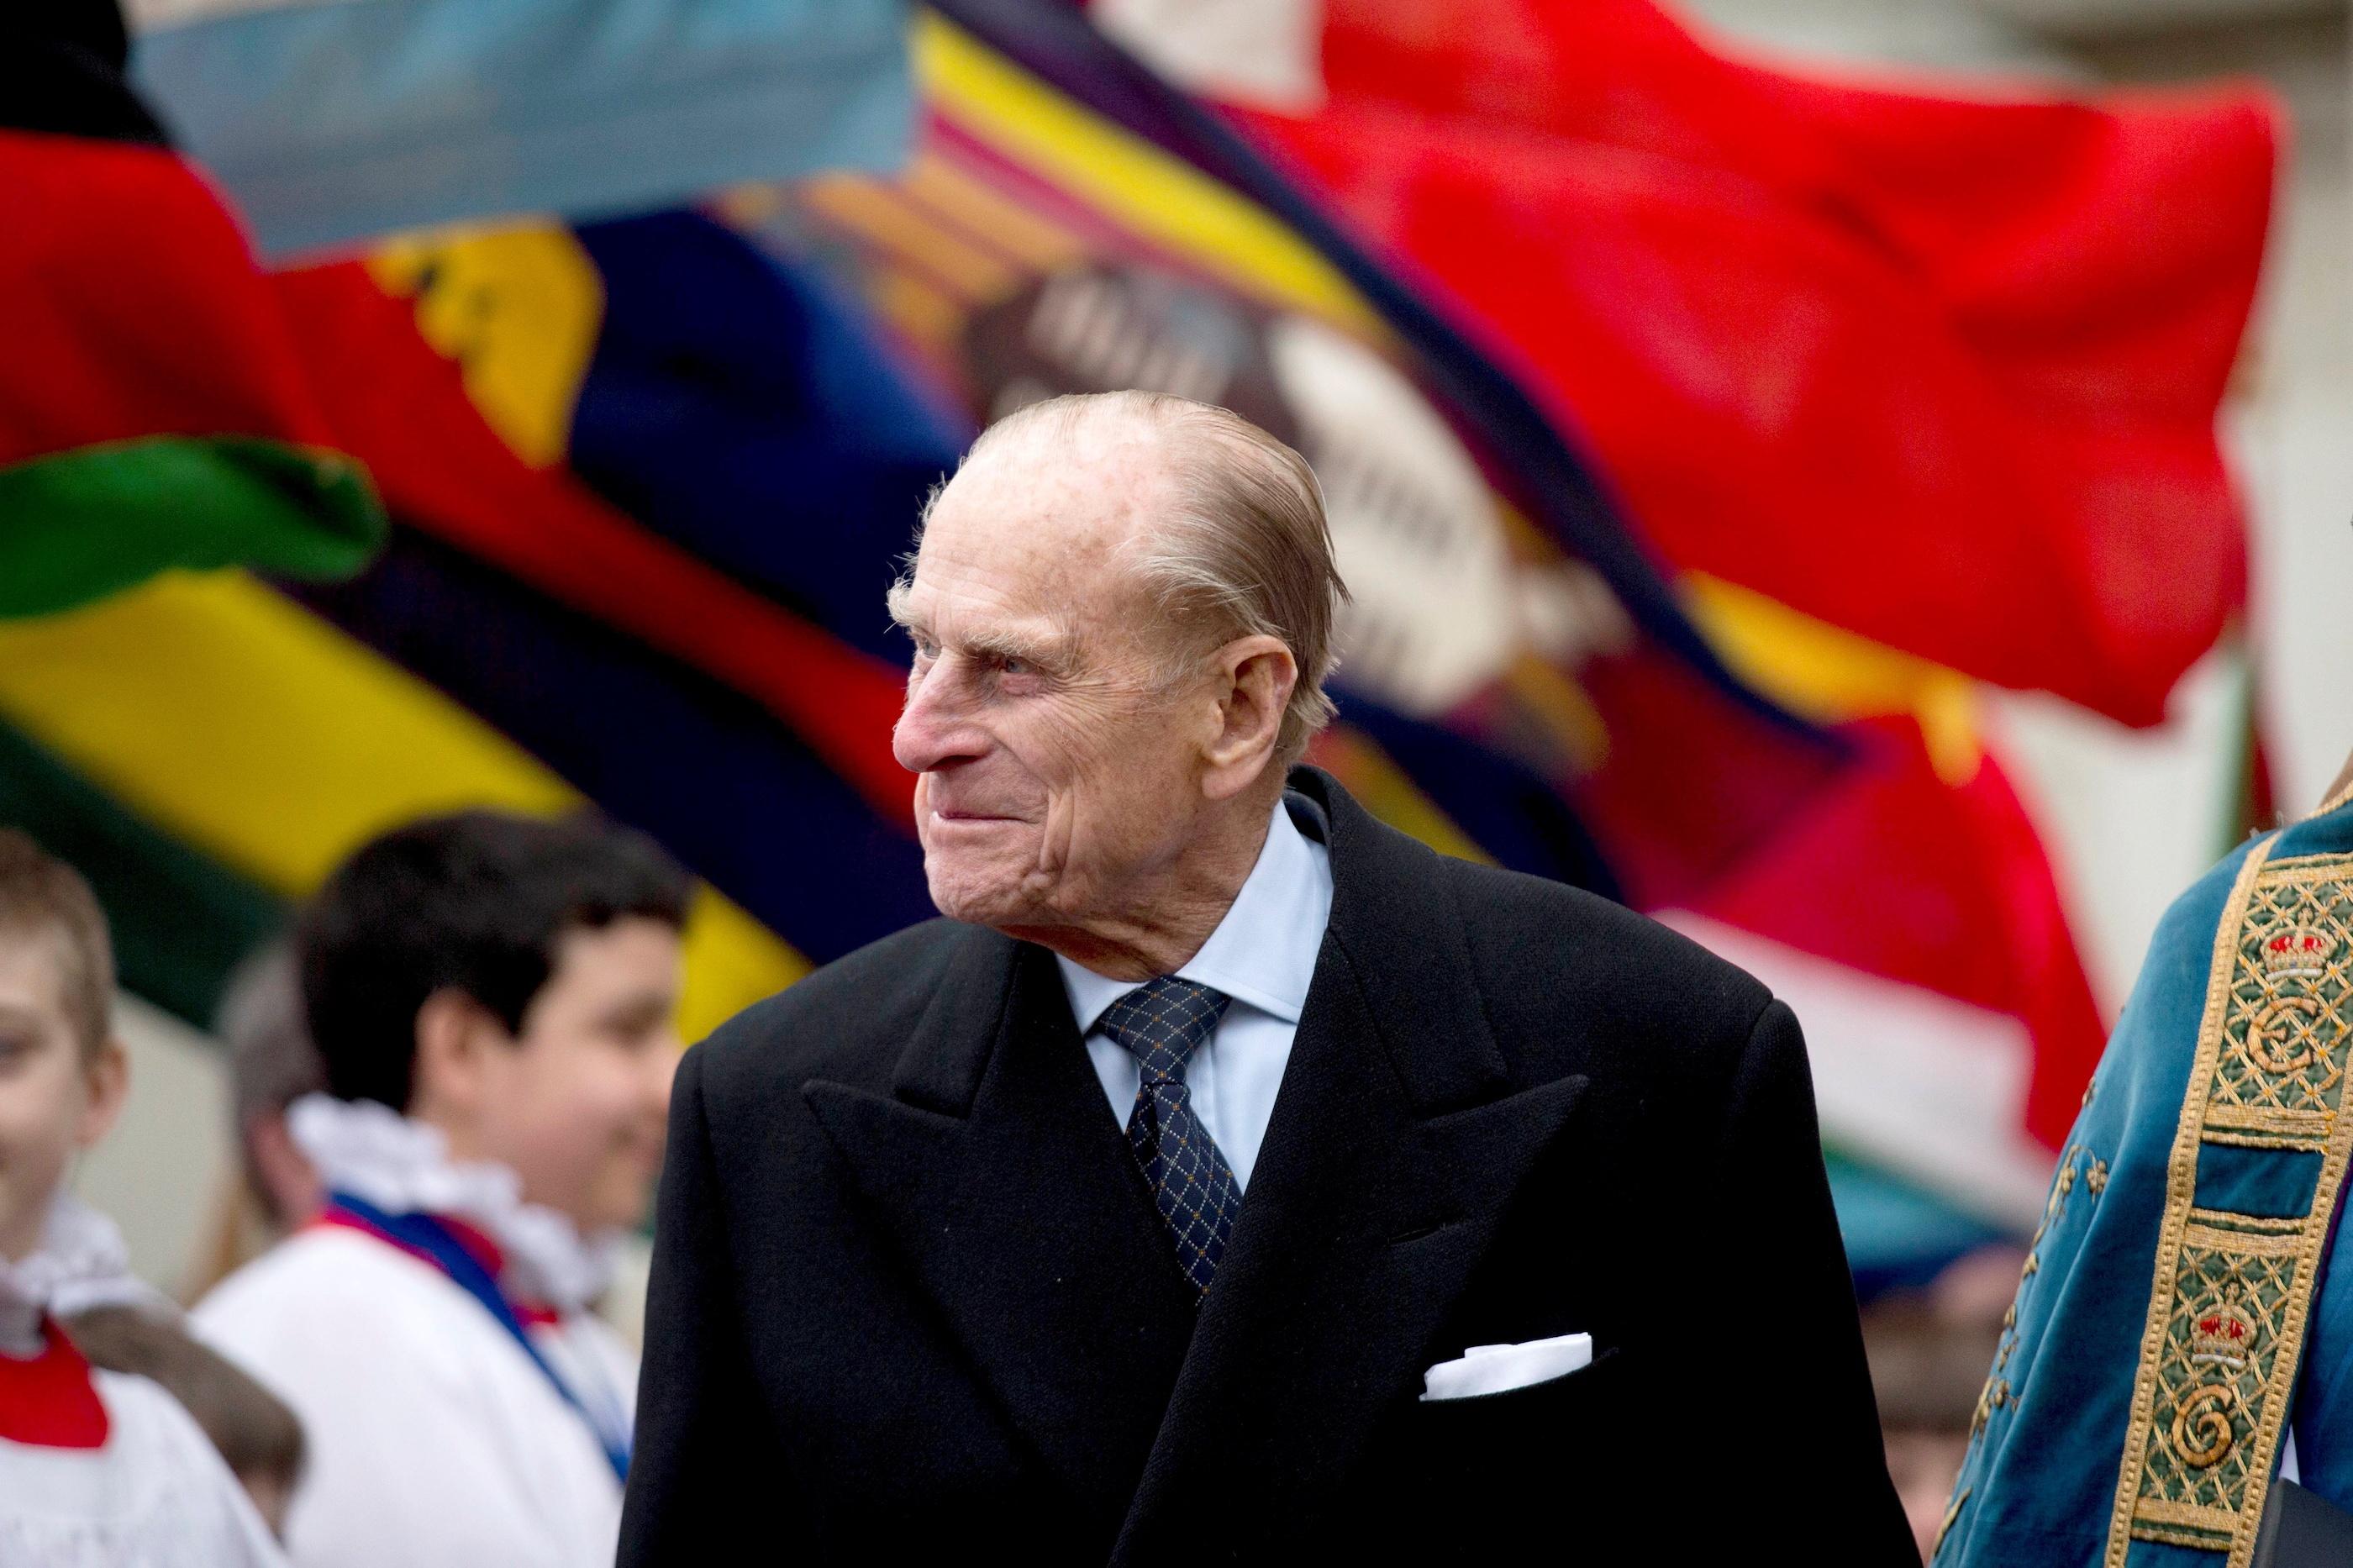 The long and often turbulent life of Prince Philip